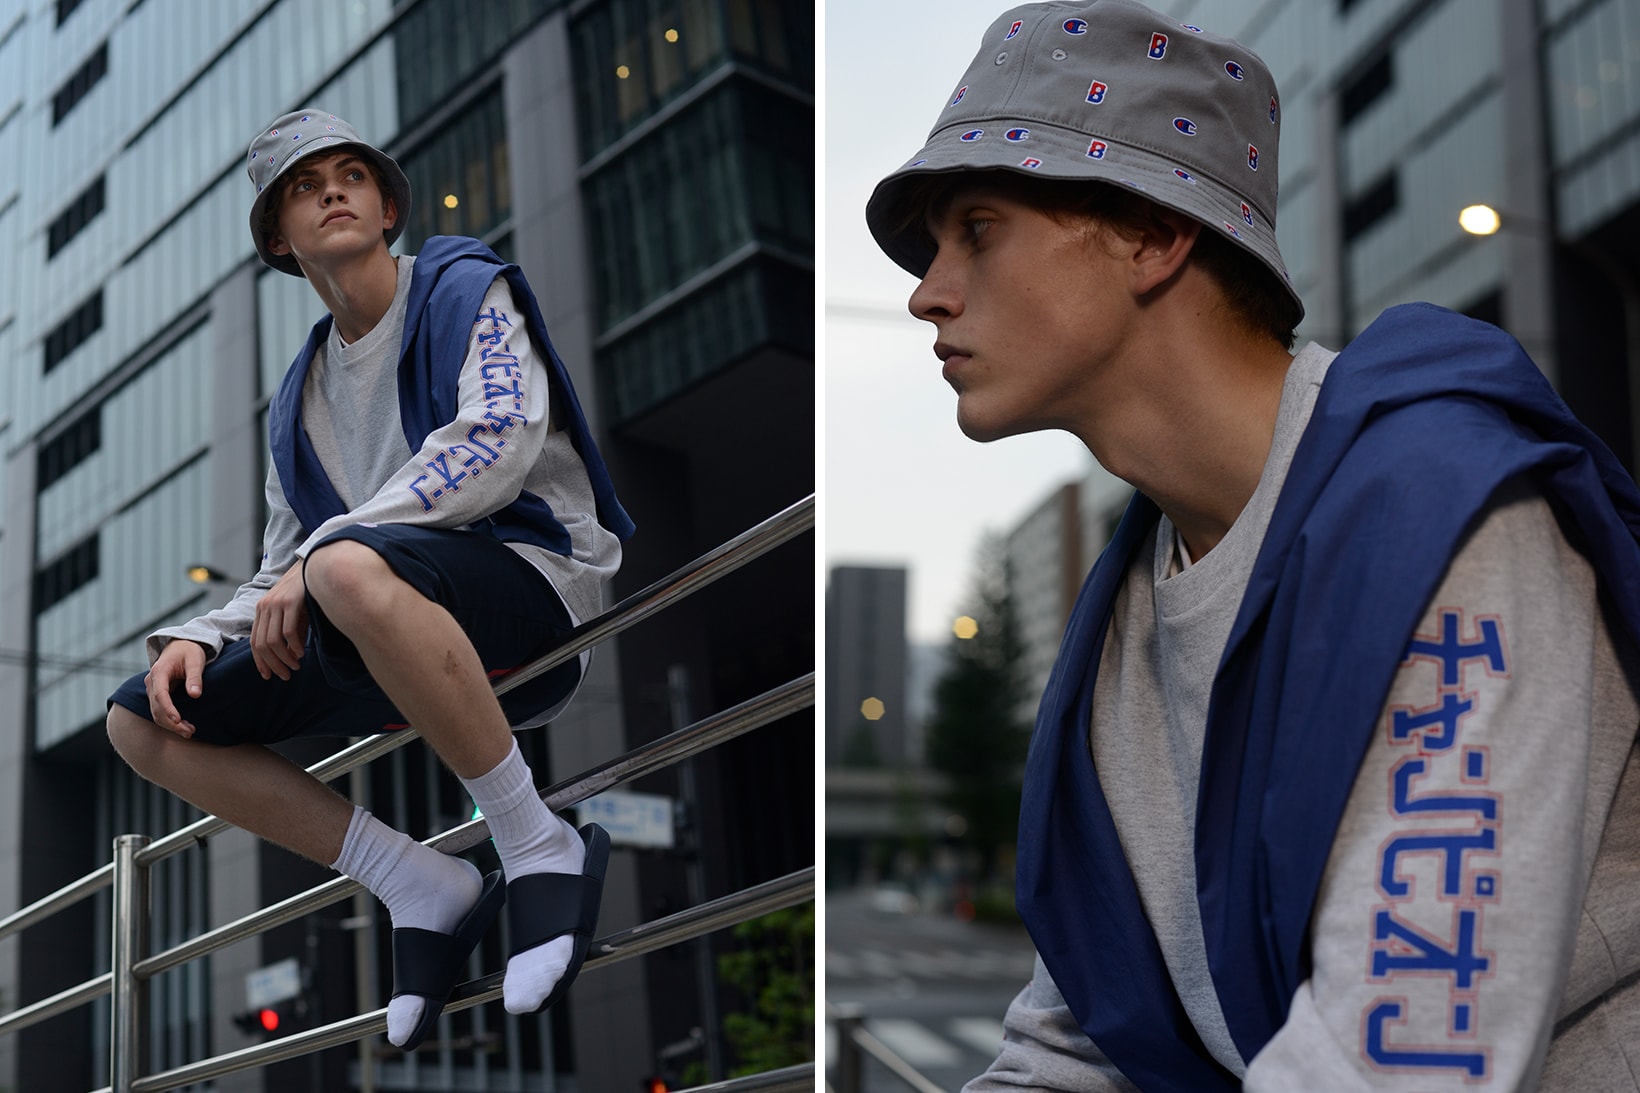 Champion BEAMS 2017 Spring/Summer Collection